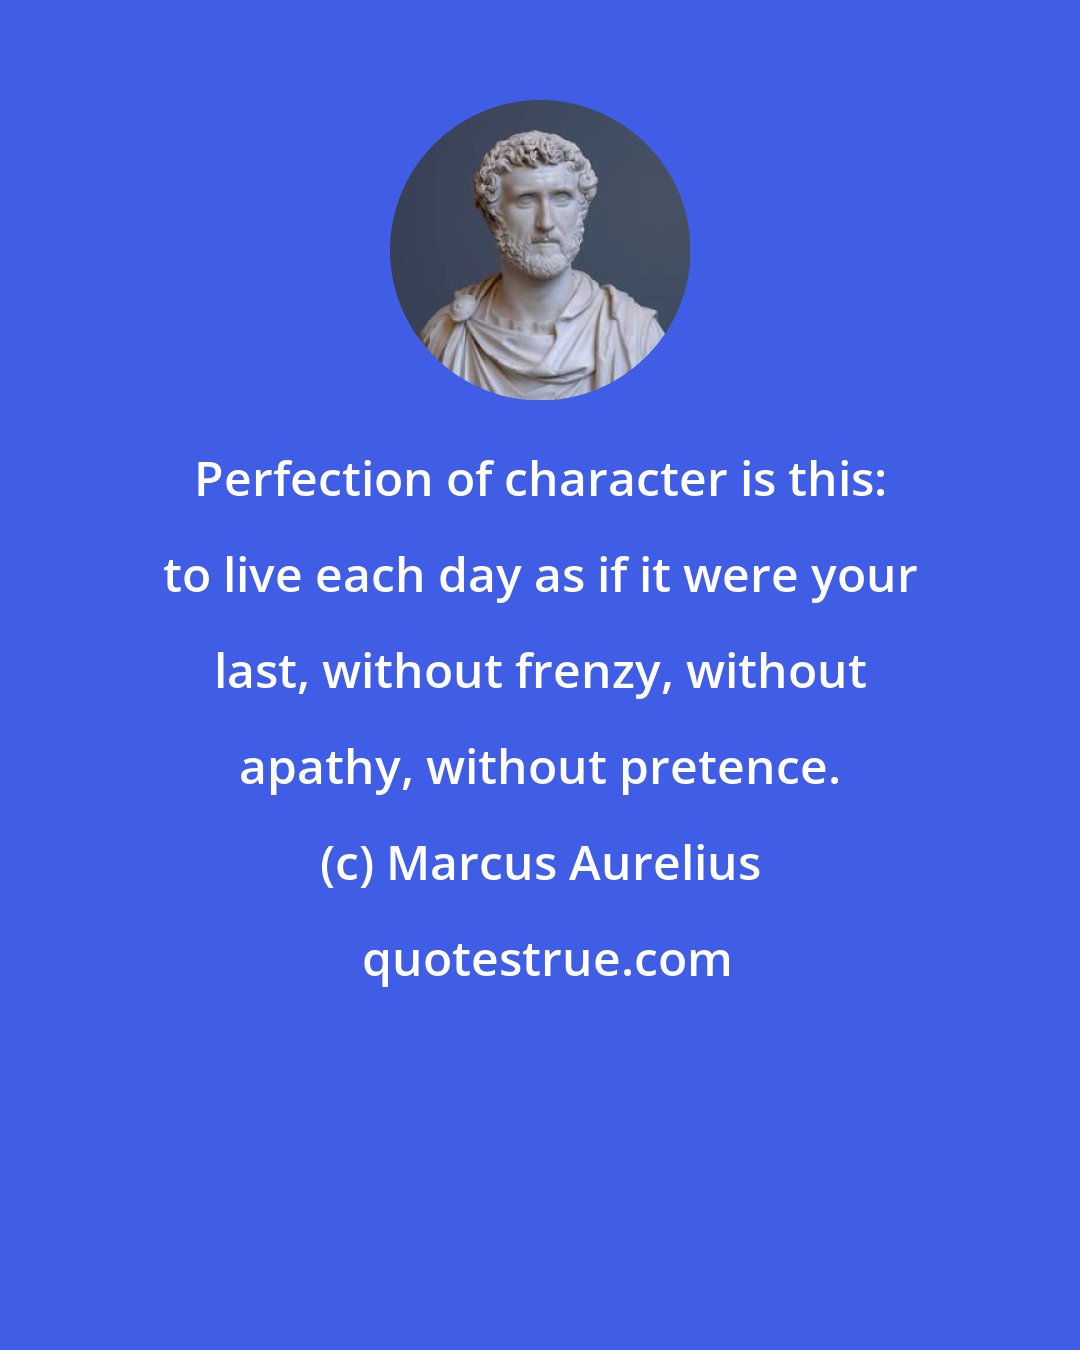 Marcus Aurelius: Perfection of character is this: to live each day as if it were your last, without frenzy, without apathy, without pretence.